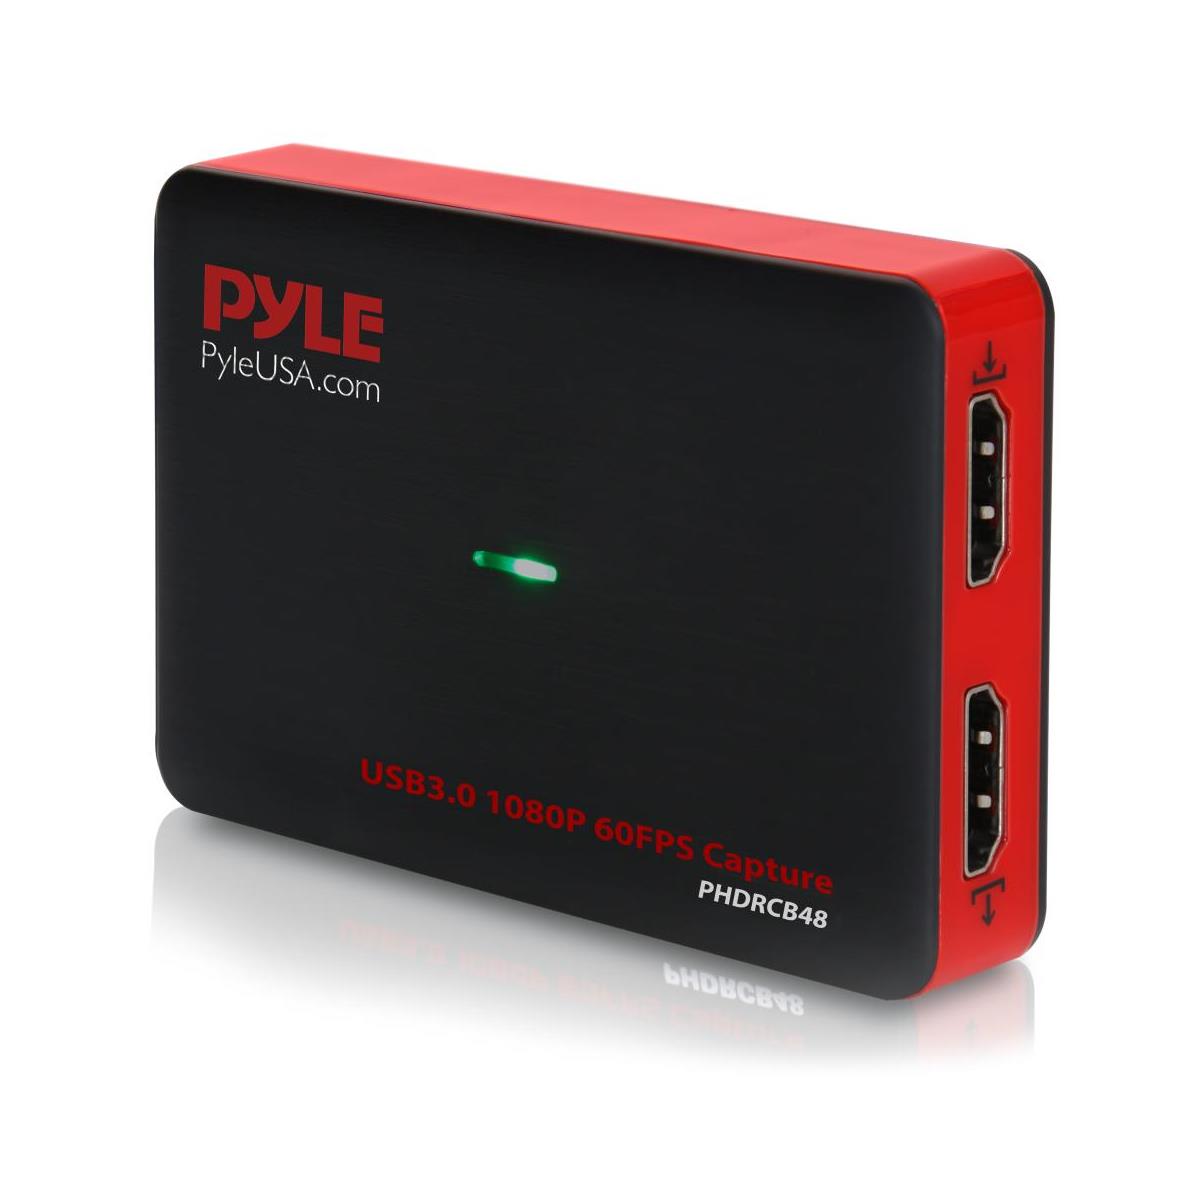 

Pyle PHDRCB48.5 Live Streaming USB3.0 HDMI Video Recorder with HDMI Pass through